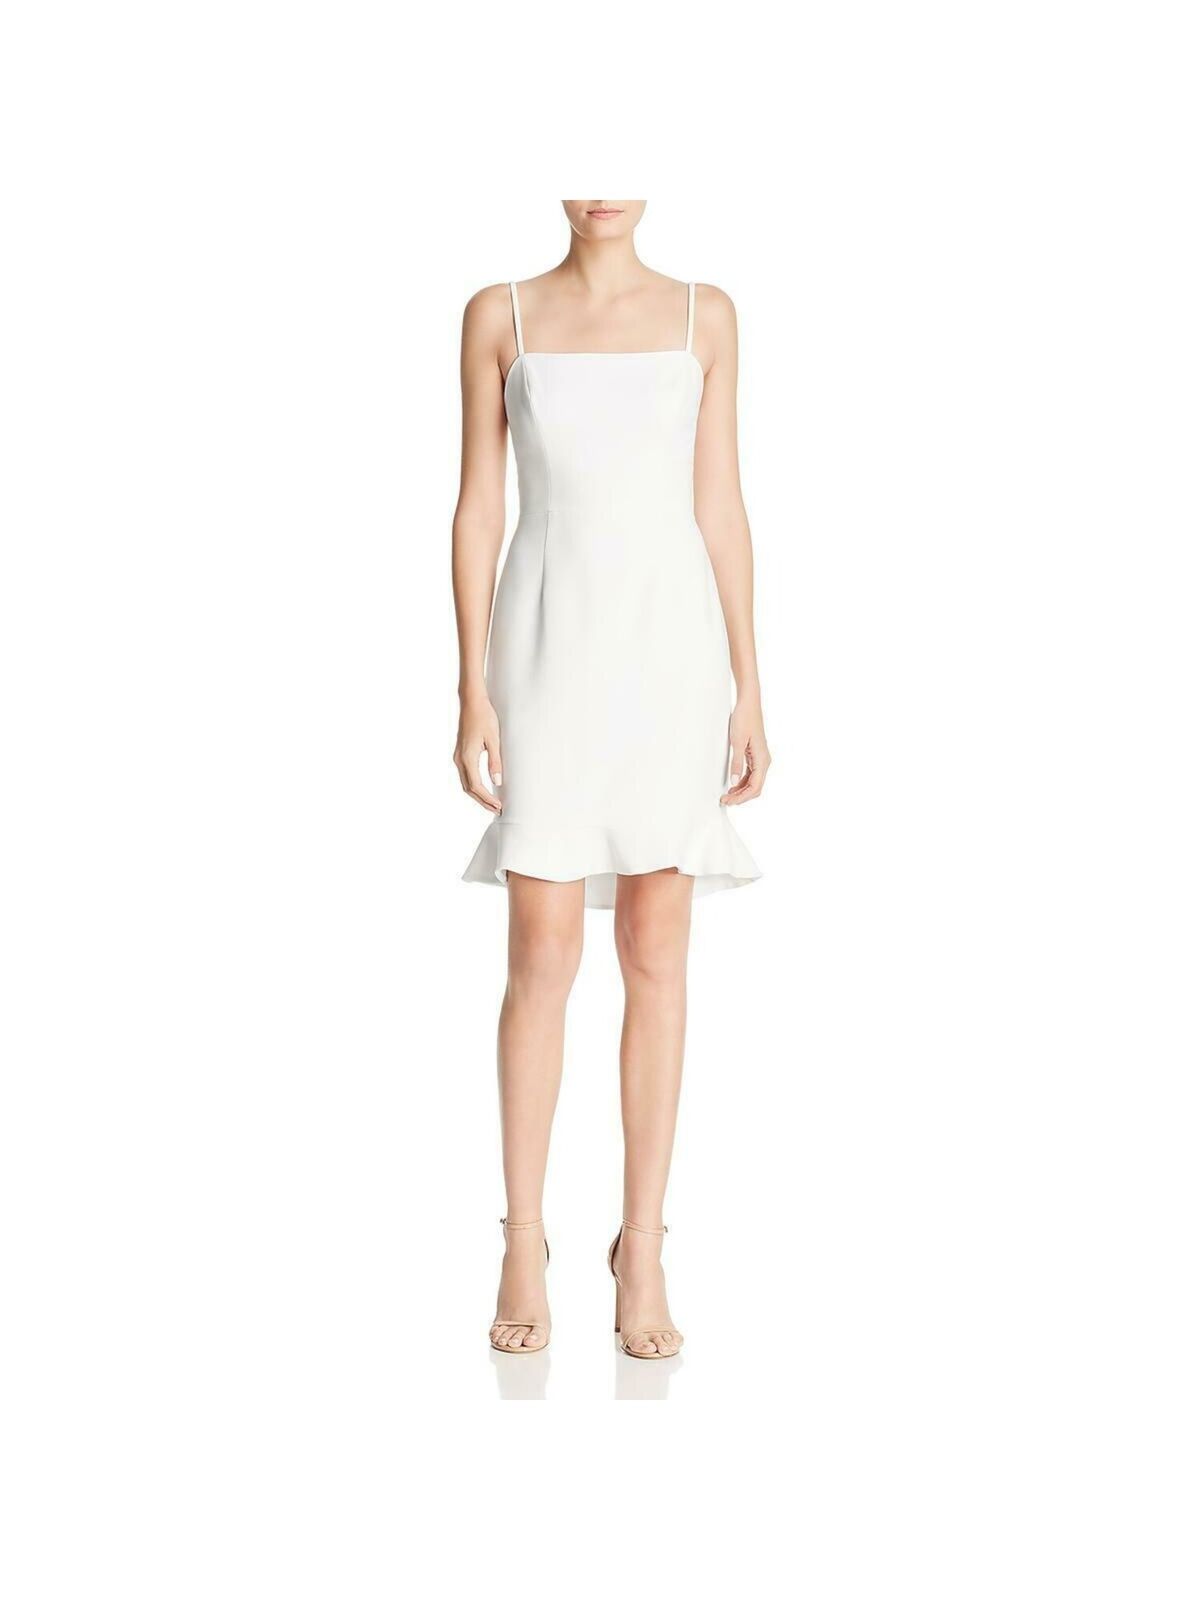 FRENCH CONNECTION Womens White Square Neck Cocktail Sheath Dress 2